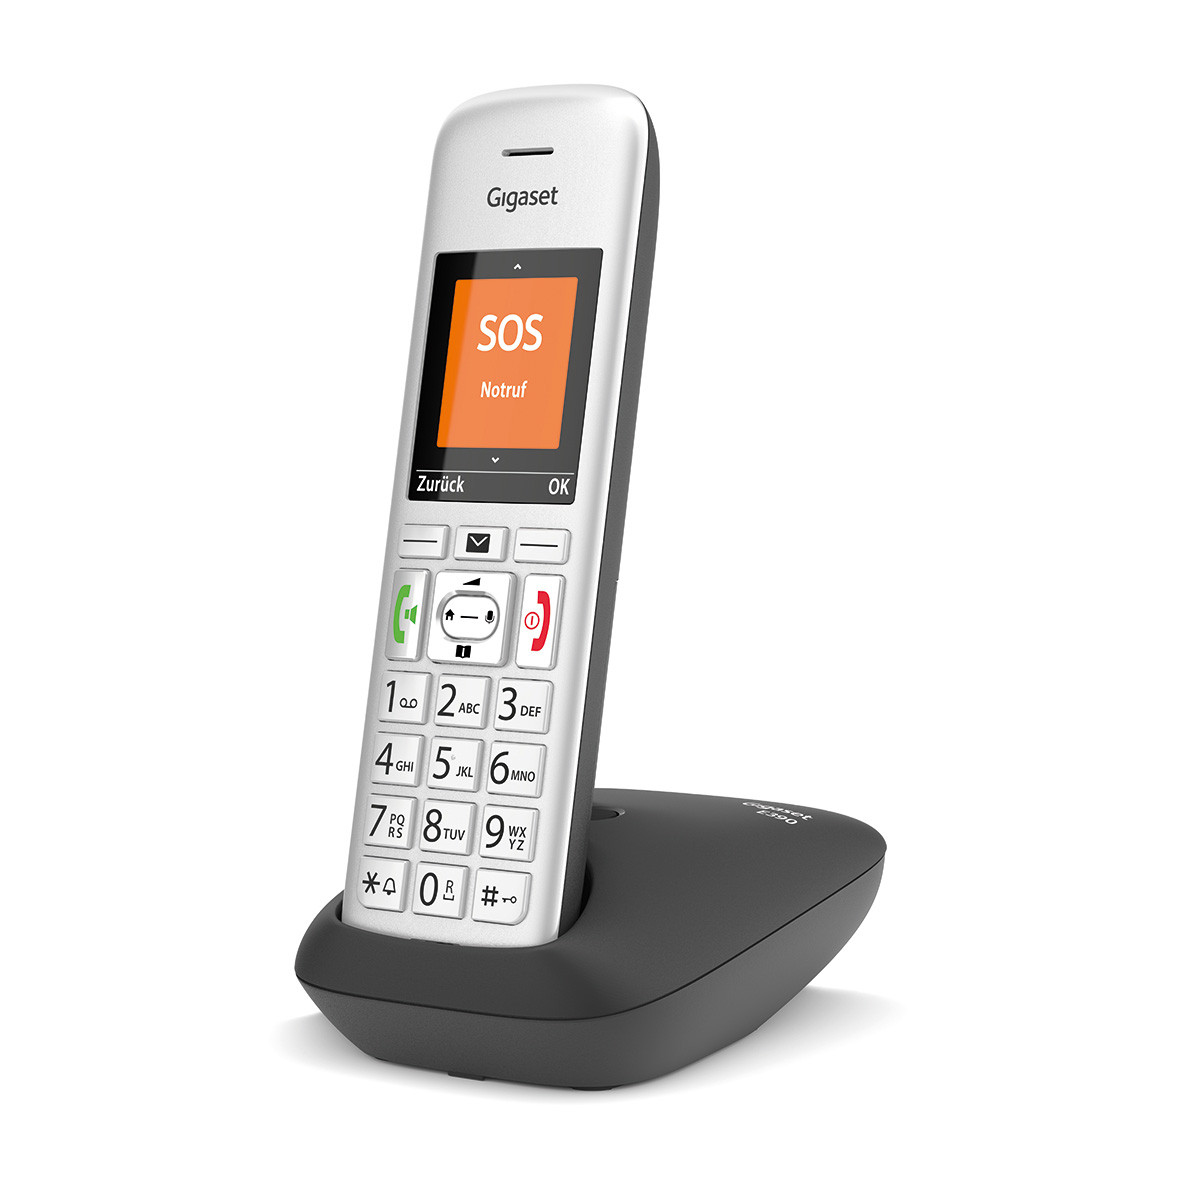 S30852-H2908-B104 UNIFY GIGASET OPENSTAGE E390 - Analog/DECT telephone - Wireless handset - Speakerphone - 200 entries - Caller ID - Black - Silver